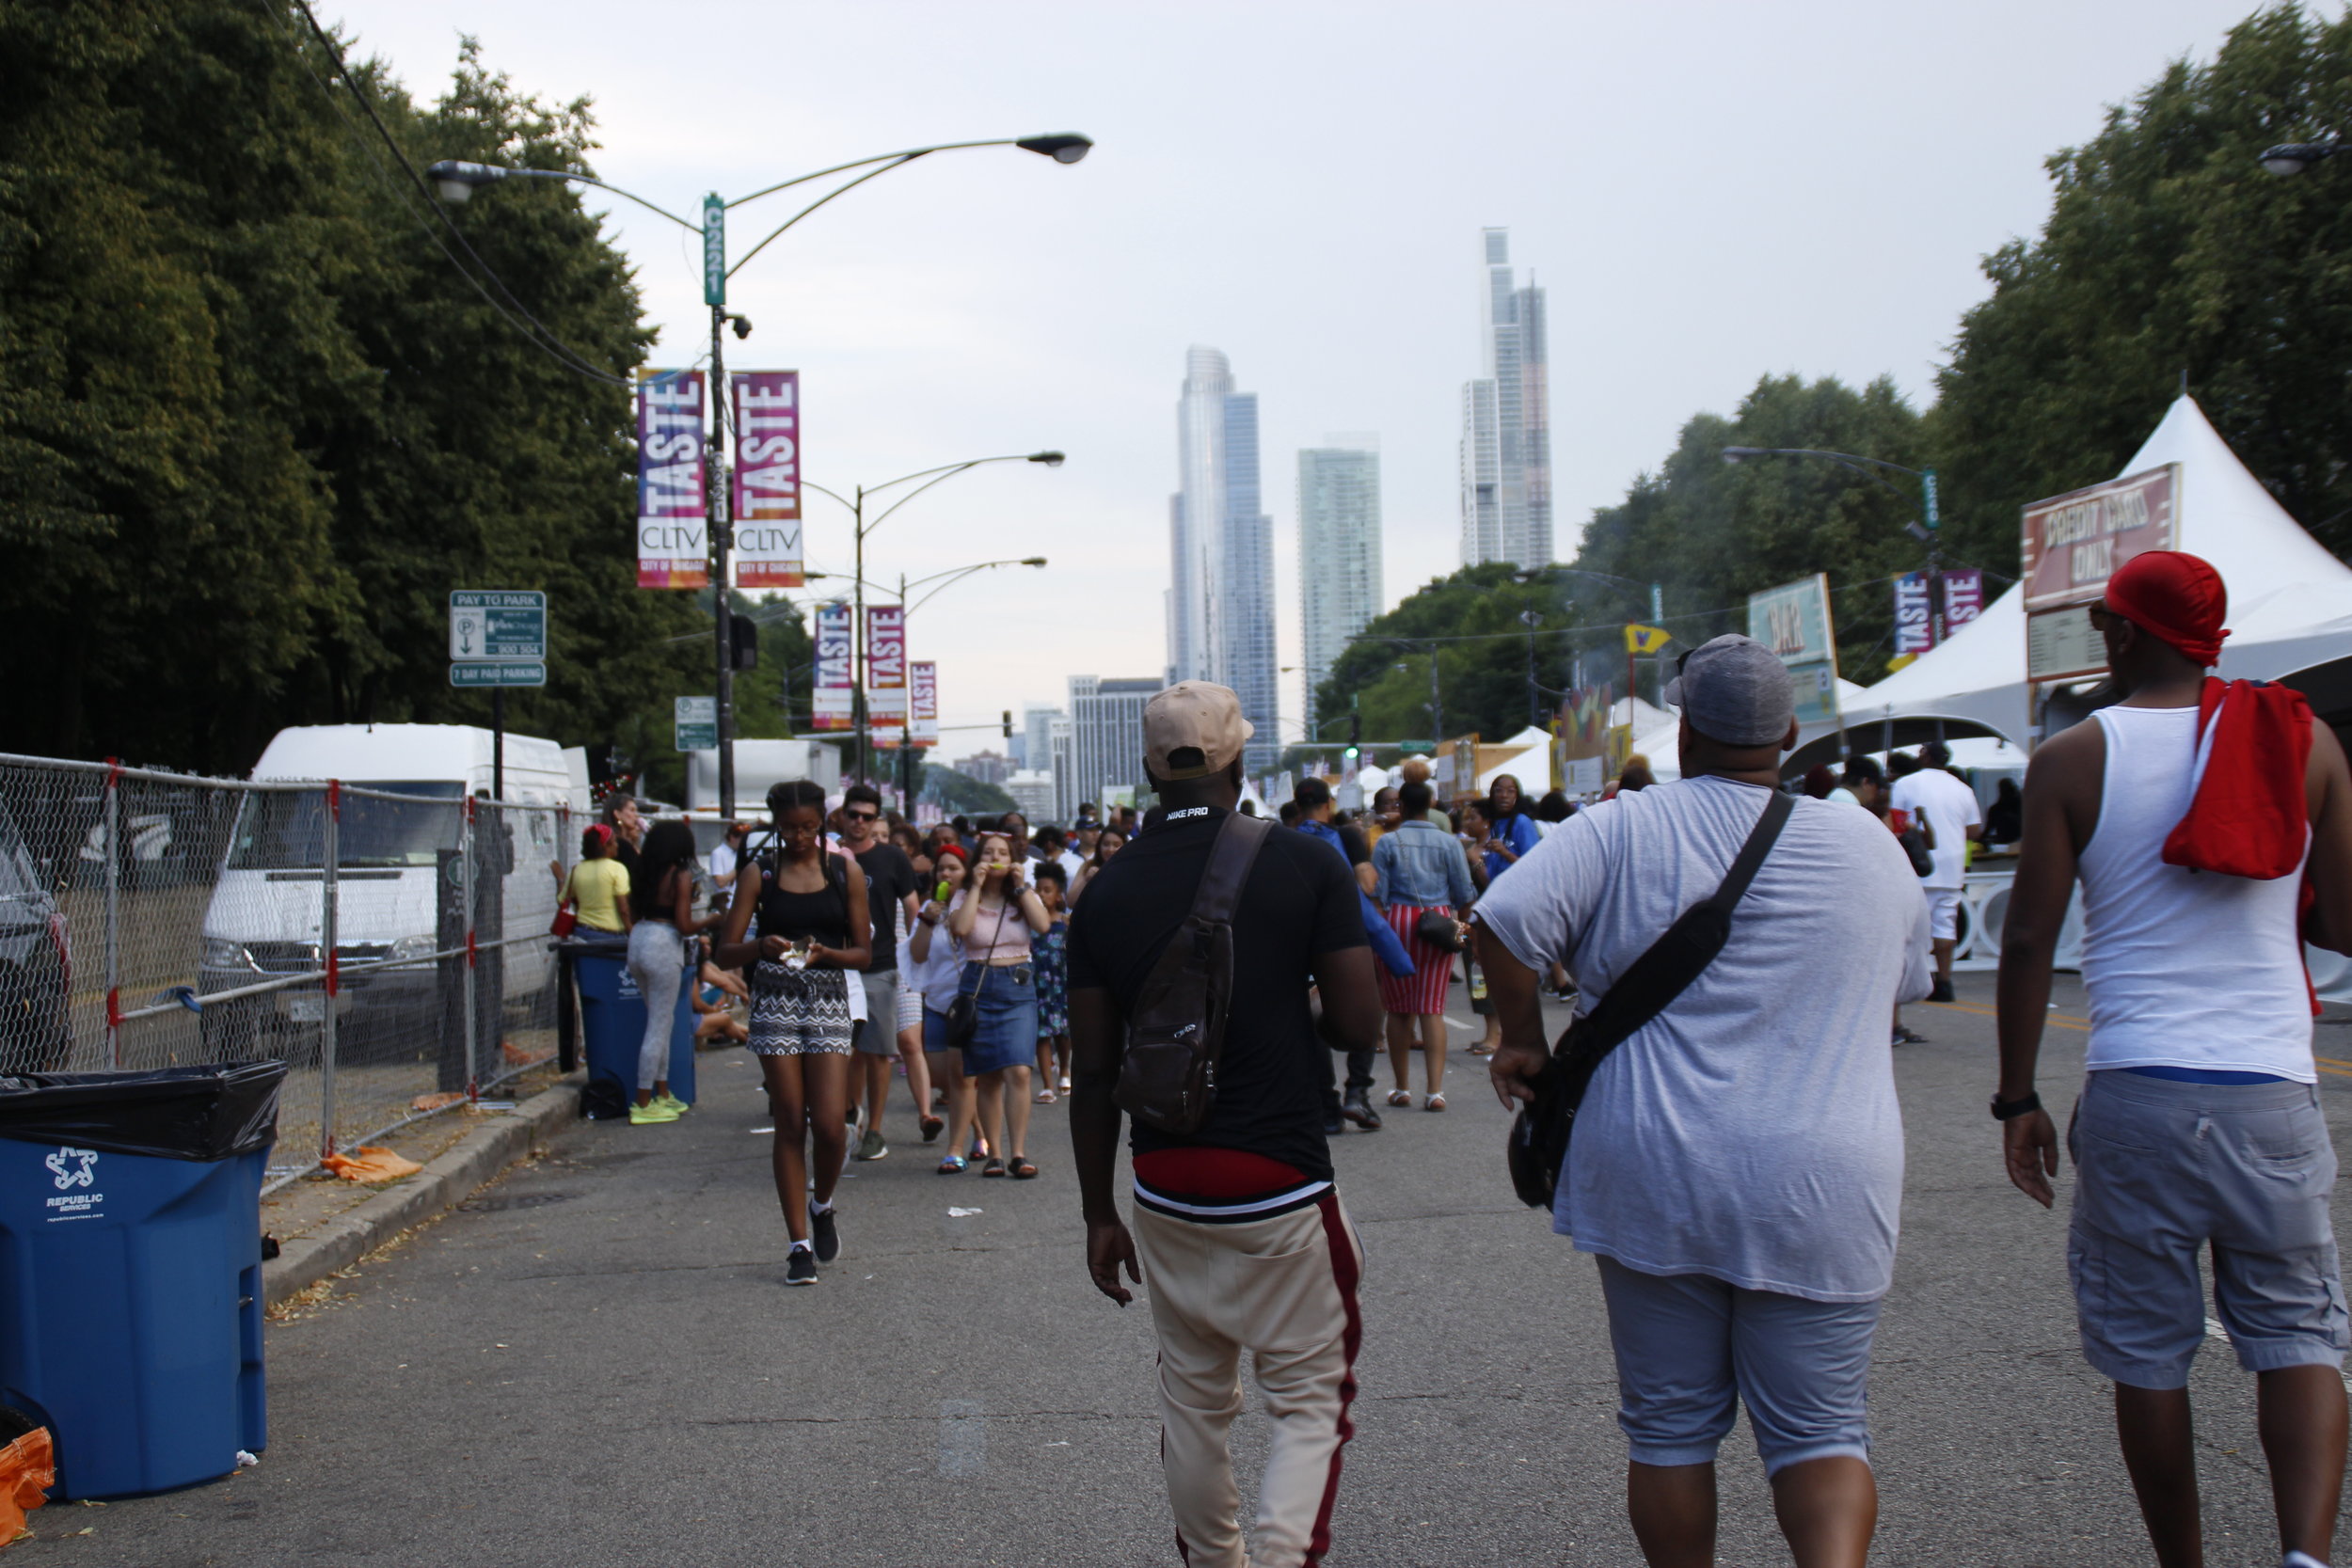  Gates were up to separate the multiple venues and other activities available at the event. Concerts, dance venues and kids playgrounds were among the other activites at this year’s 39th annual Taste of Chicago. 